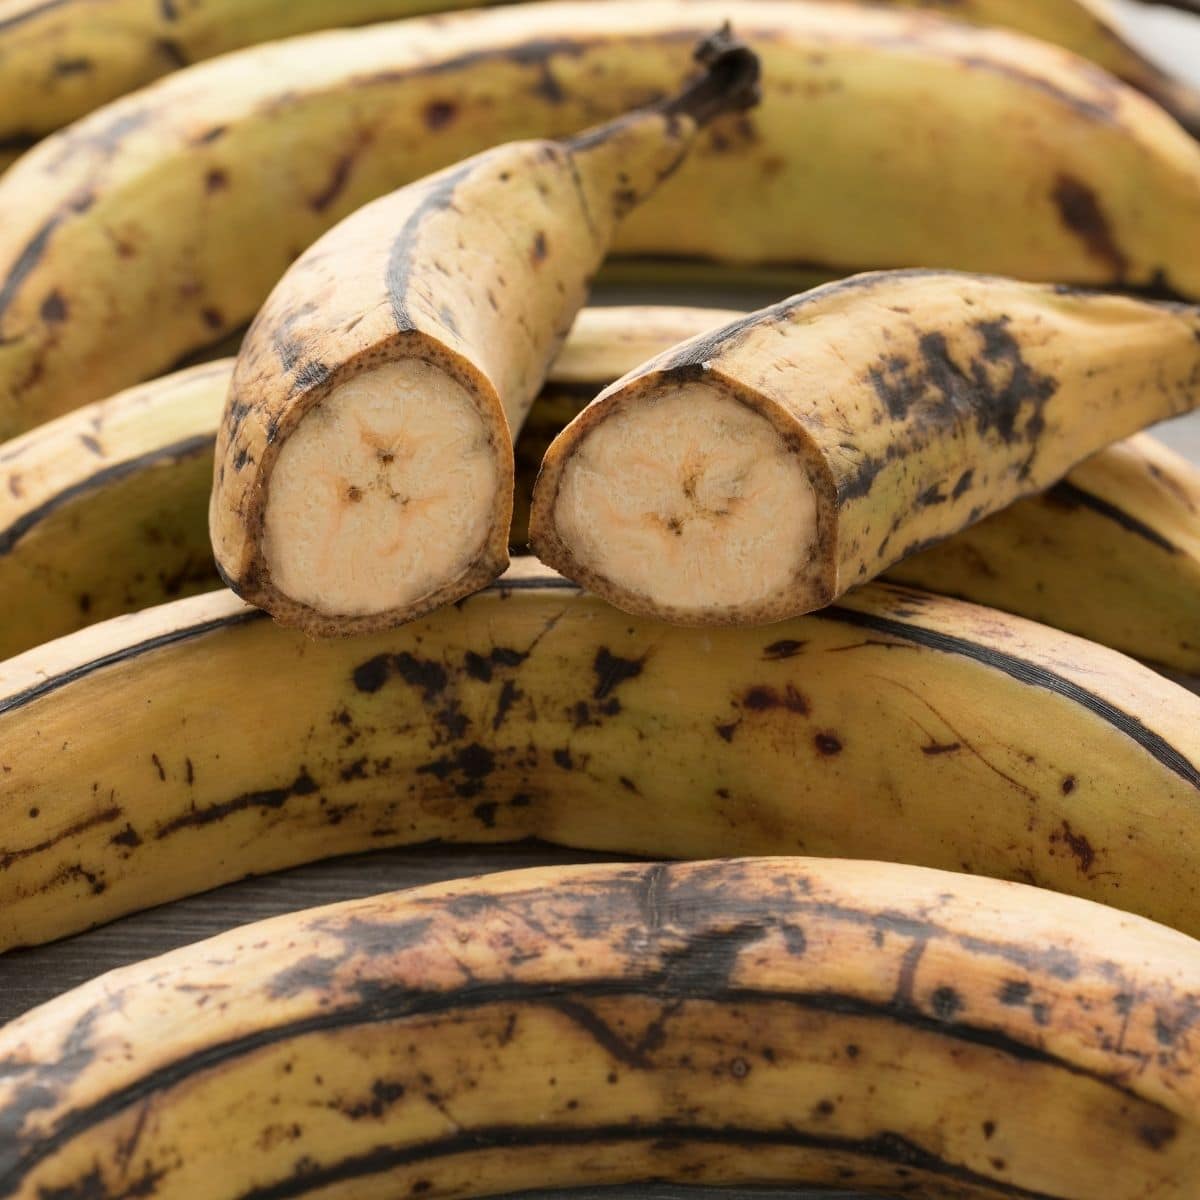 Ripe plantains divide in to half and placed on the whole plantains.